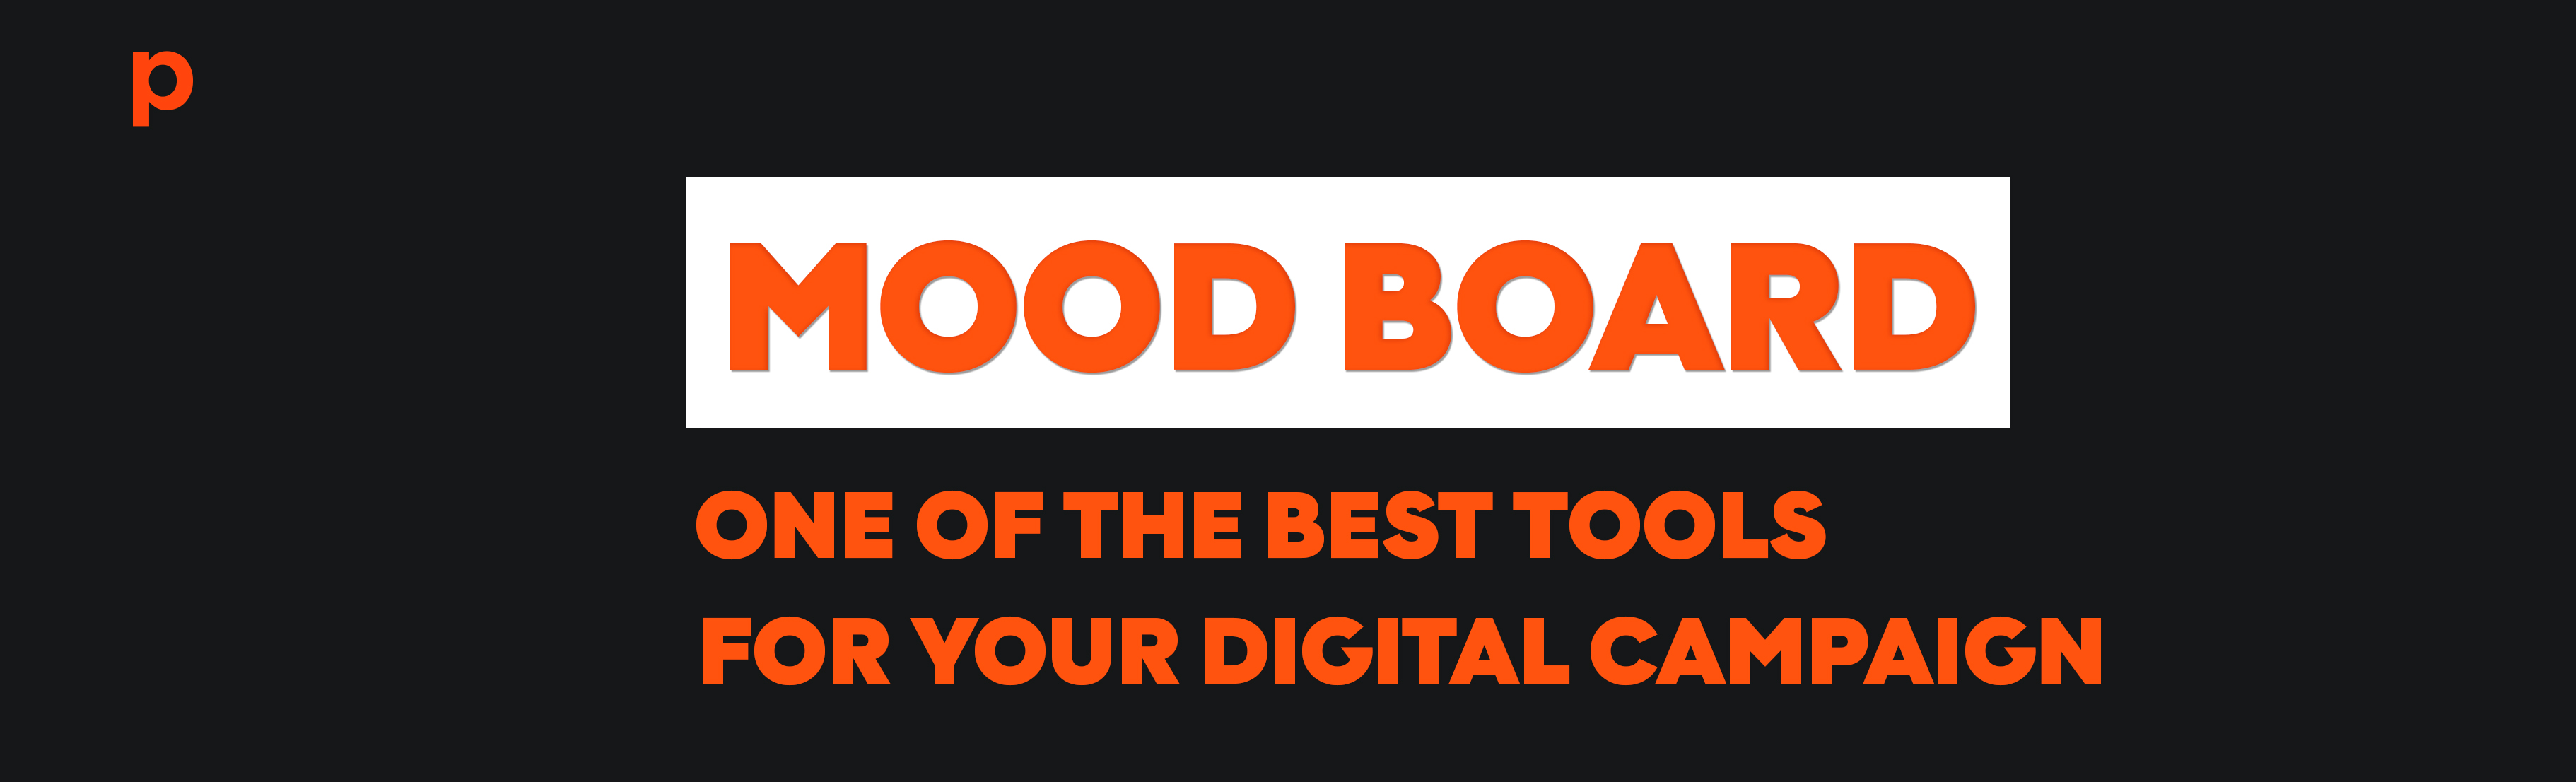 Moodboard, a brief introduction to one of the most effective tools in the digital campaigns